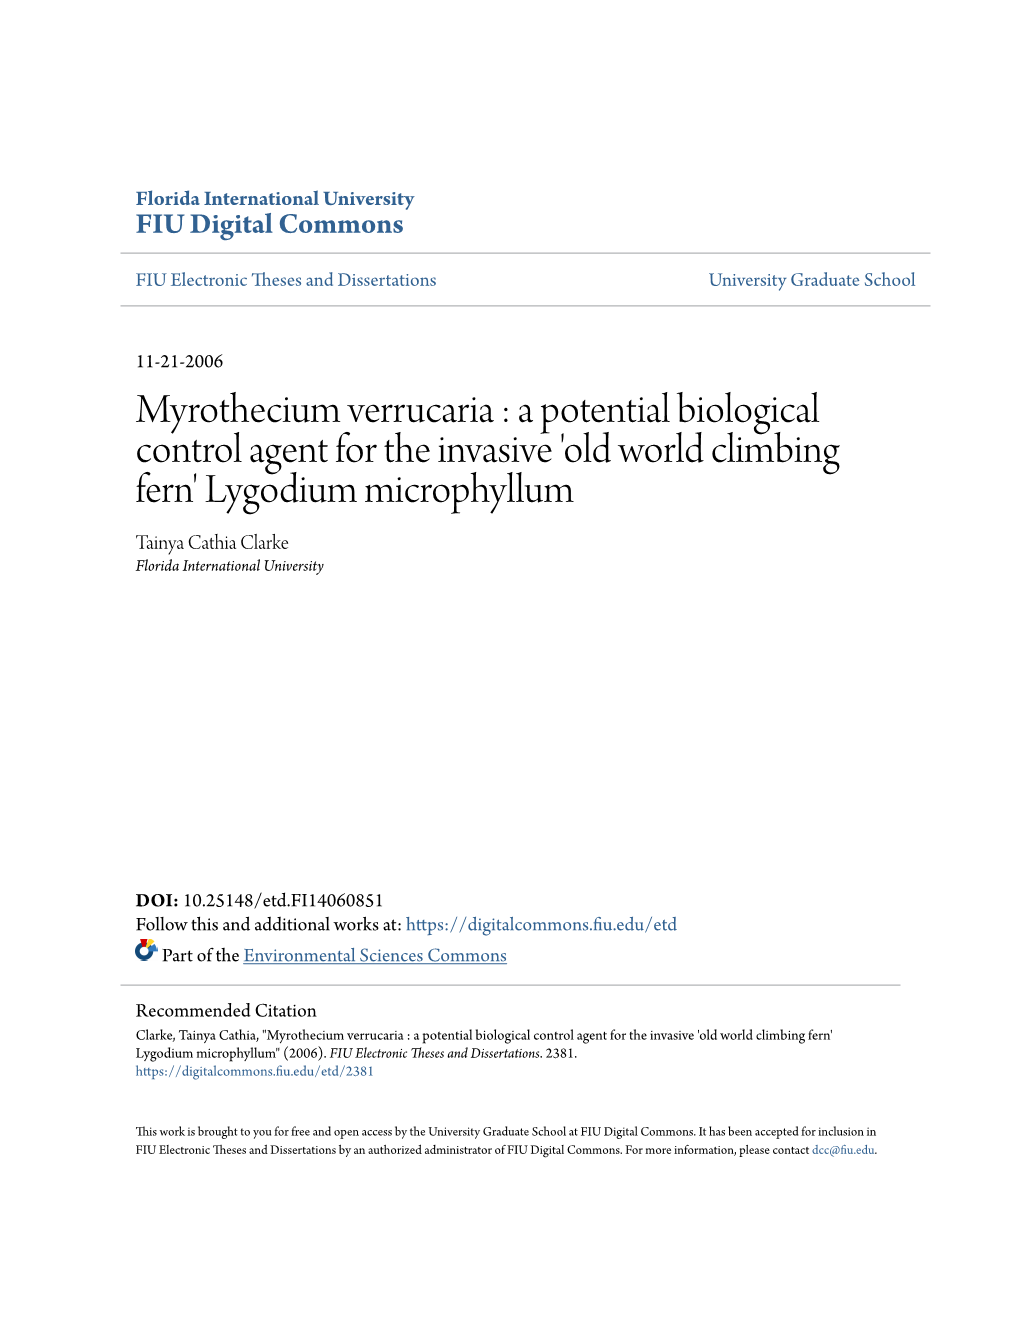 Myrothecium Verrucaria : a Potential Biological Control Agent for the Invasive 'Old World Climbing Fern' Lygodium Microp